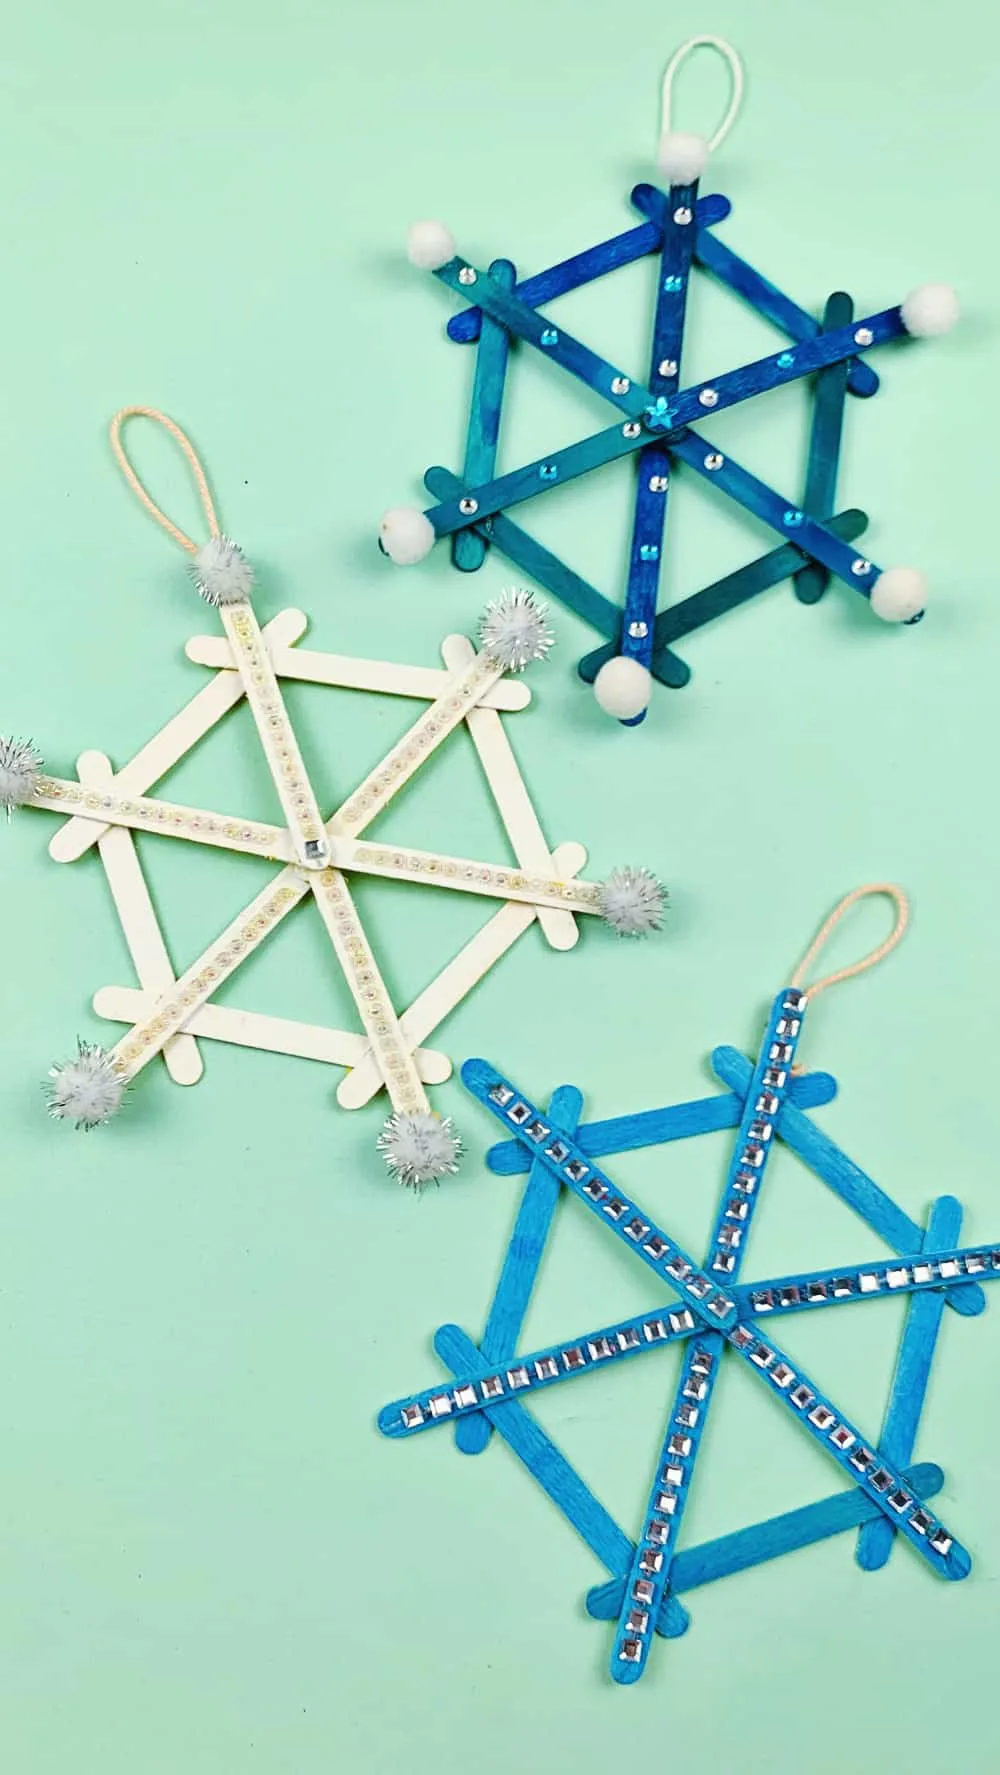 Popsicle Sticks Snowflake Craft: An Easy Step-by-Step Tutorial